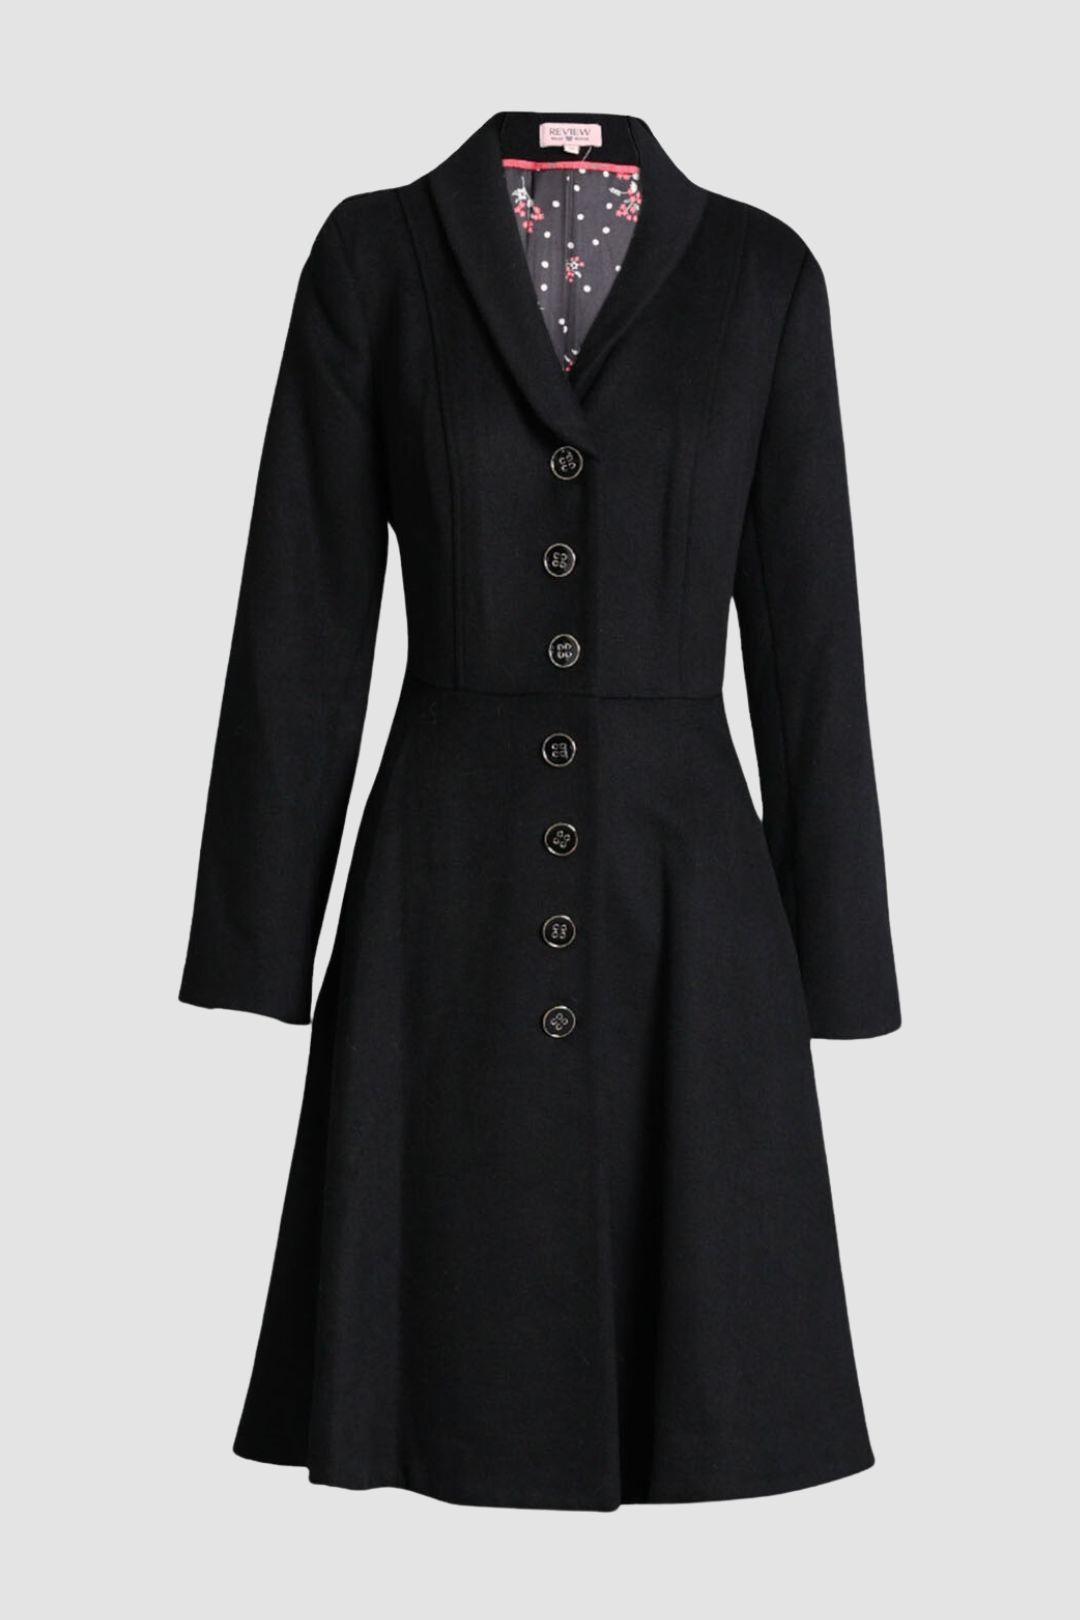 Review Single Breasted Black Swing Coat